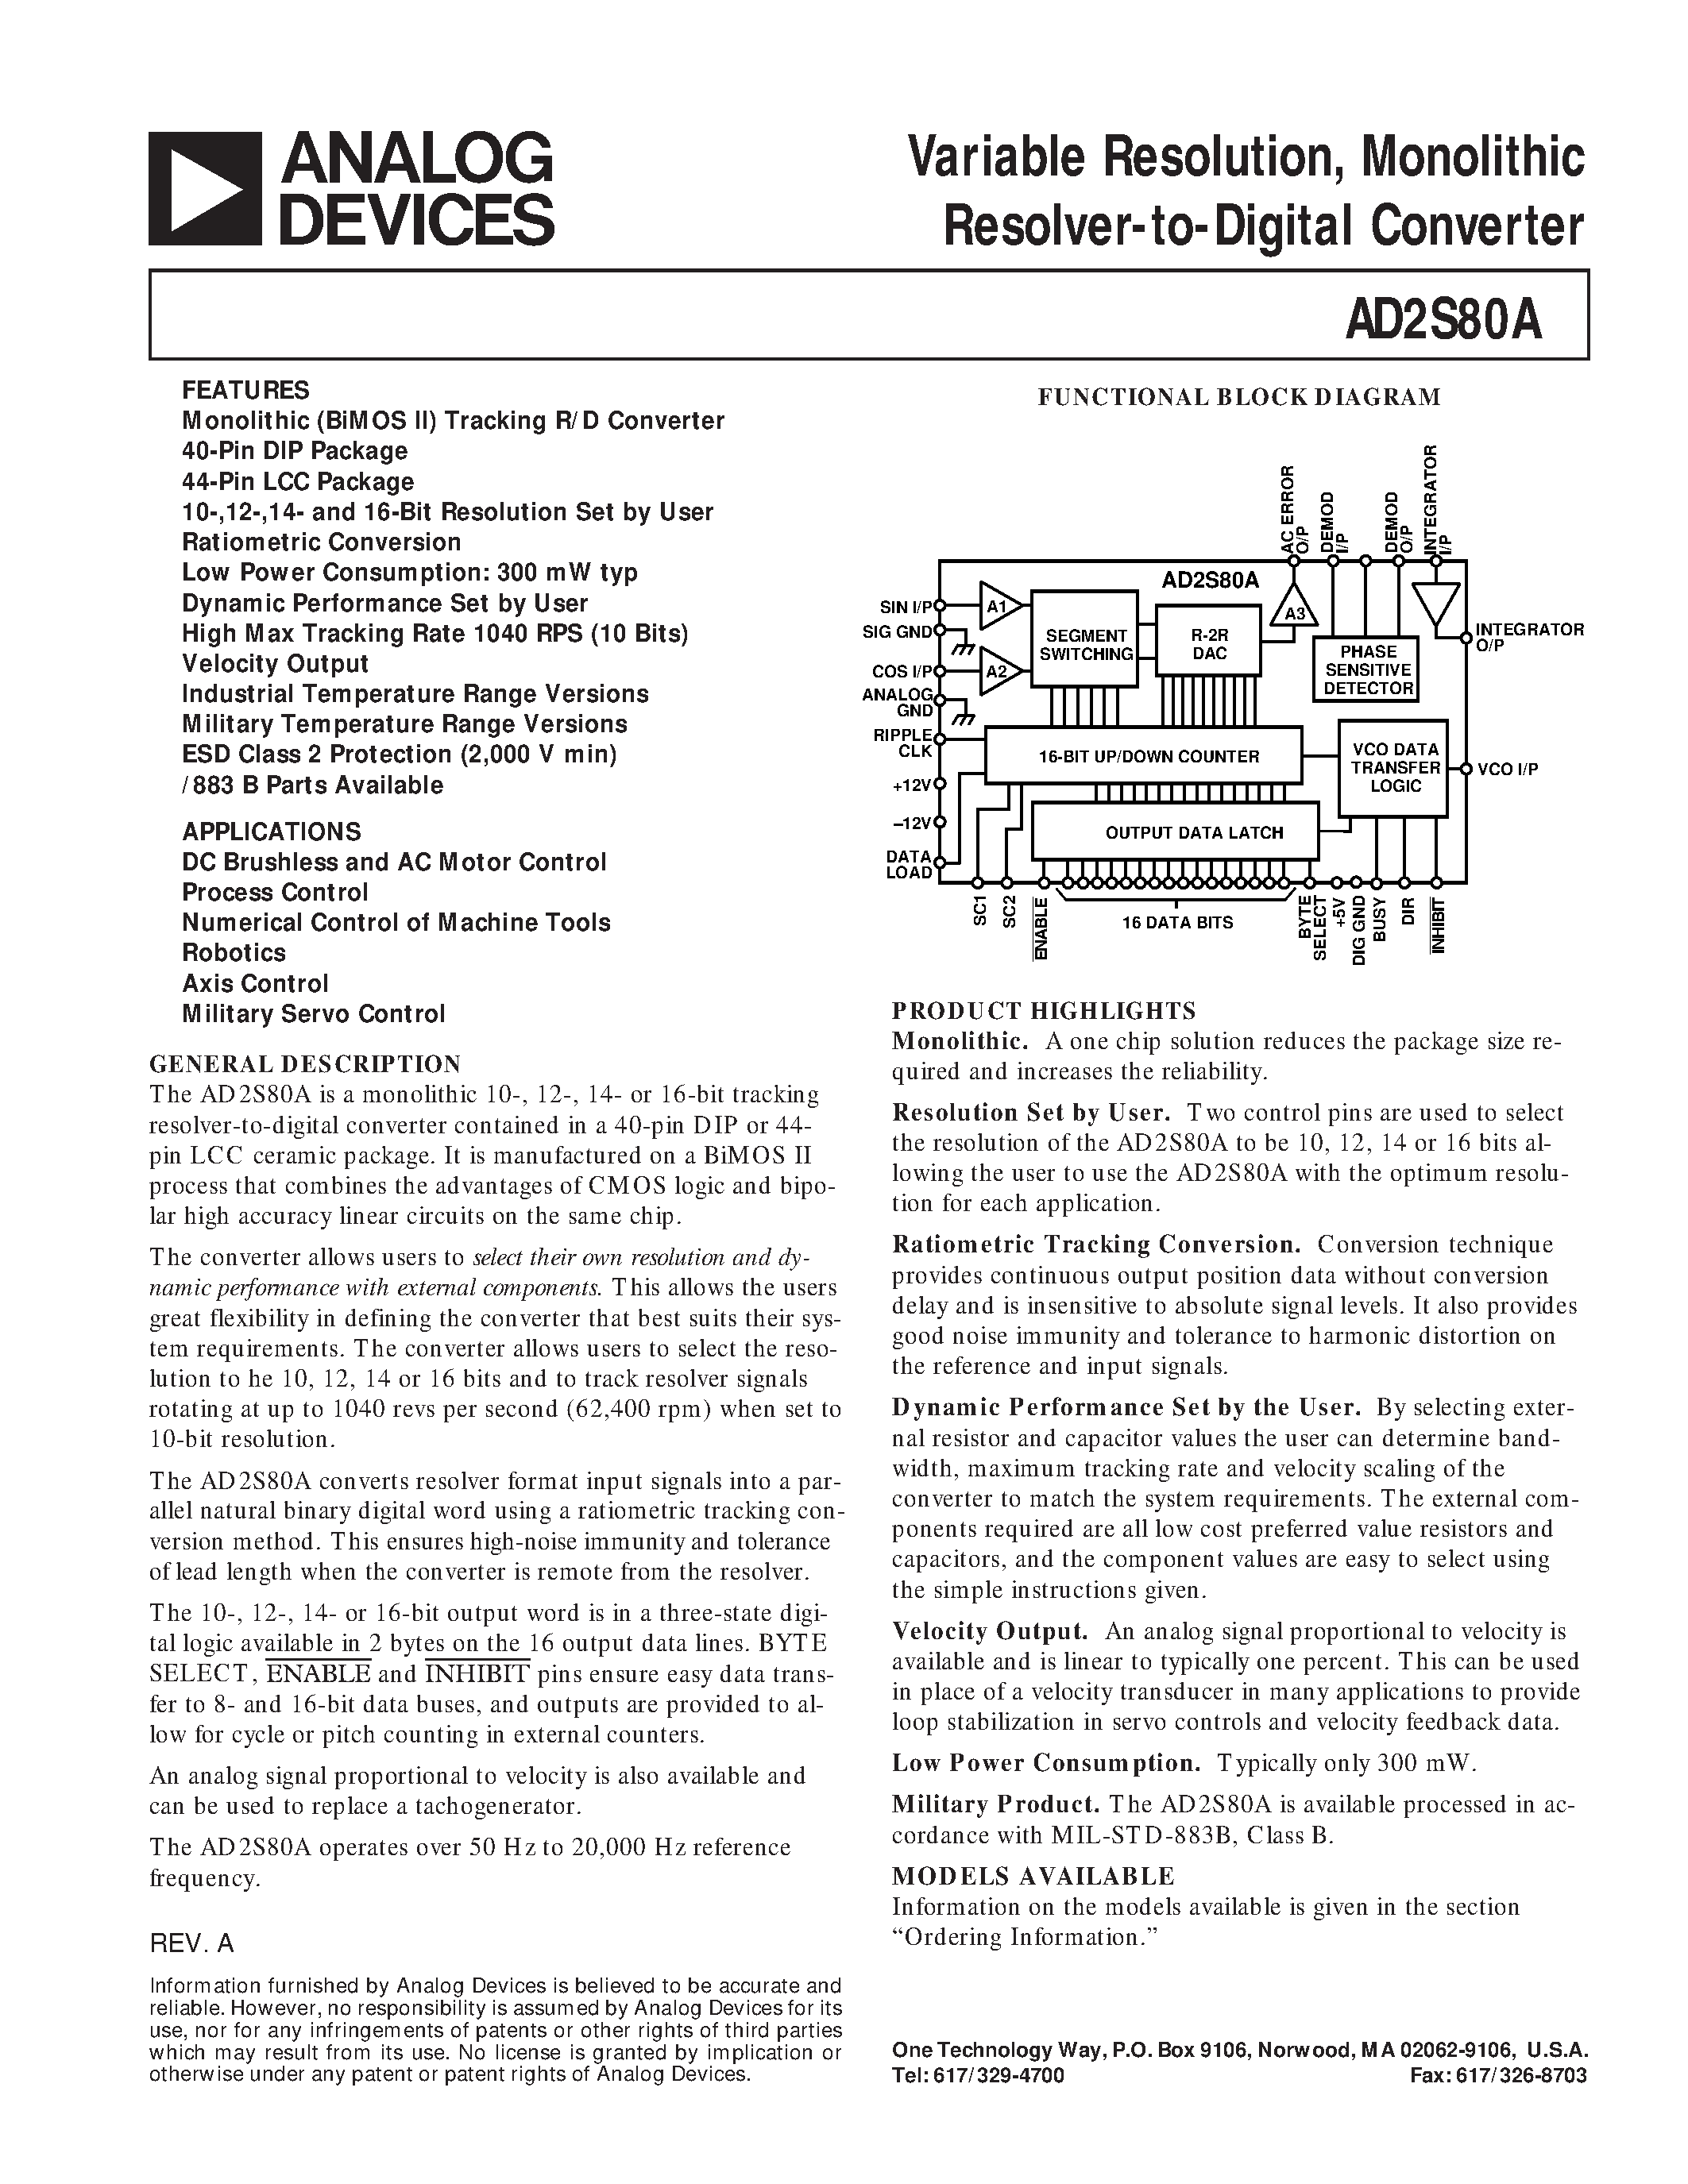 Даташит AD2S80AJD - Variable Resolution/ Monolithic Resolver-to-Digital Converter страница 1